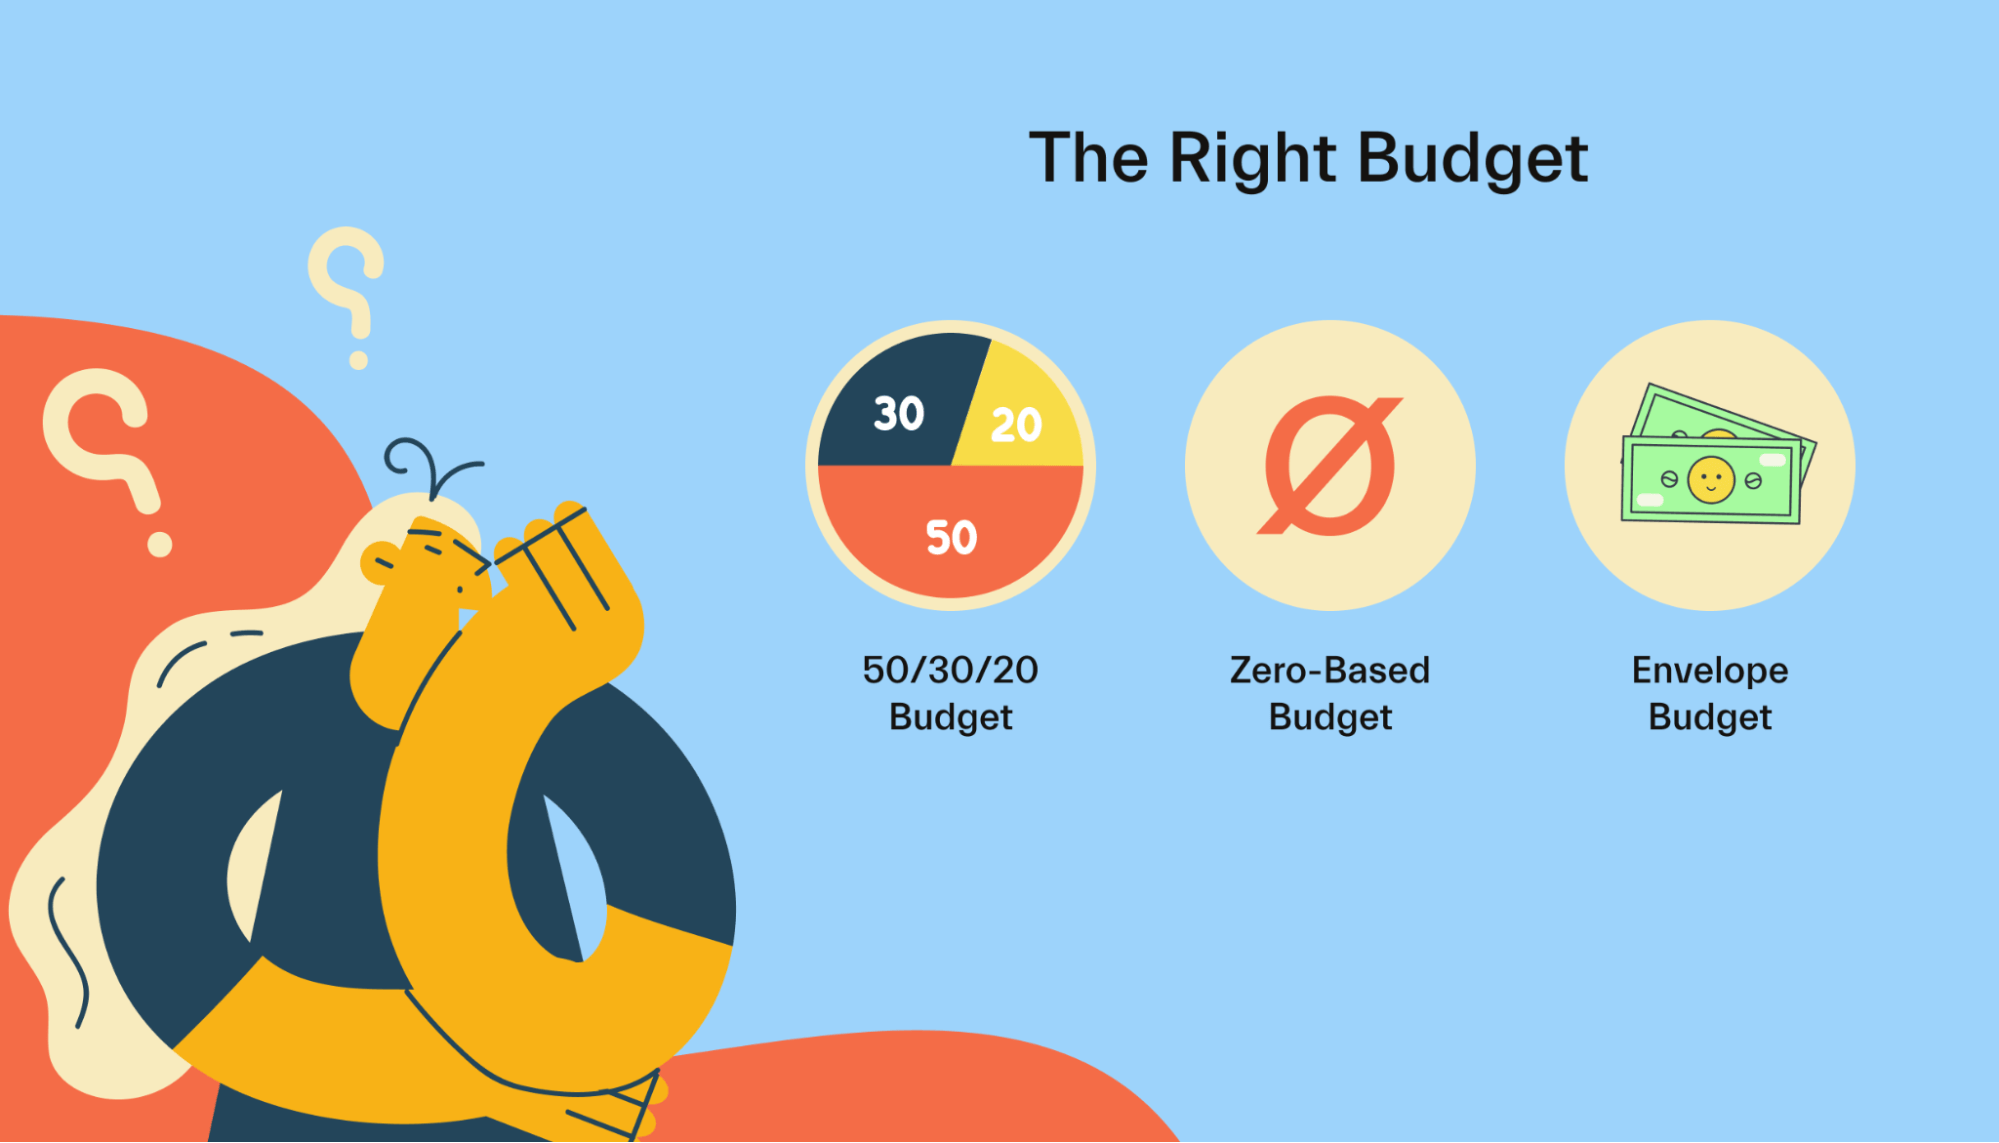 The right budget